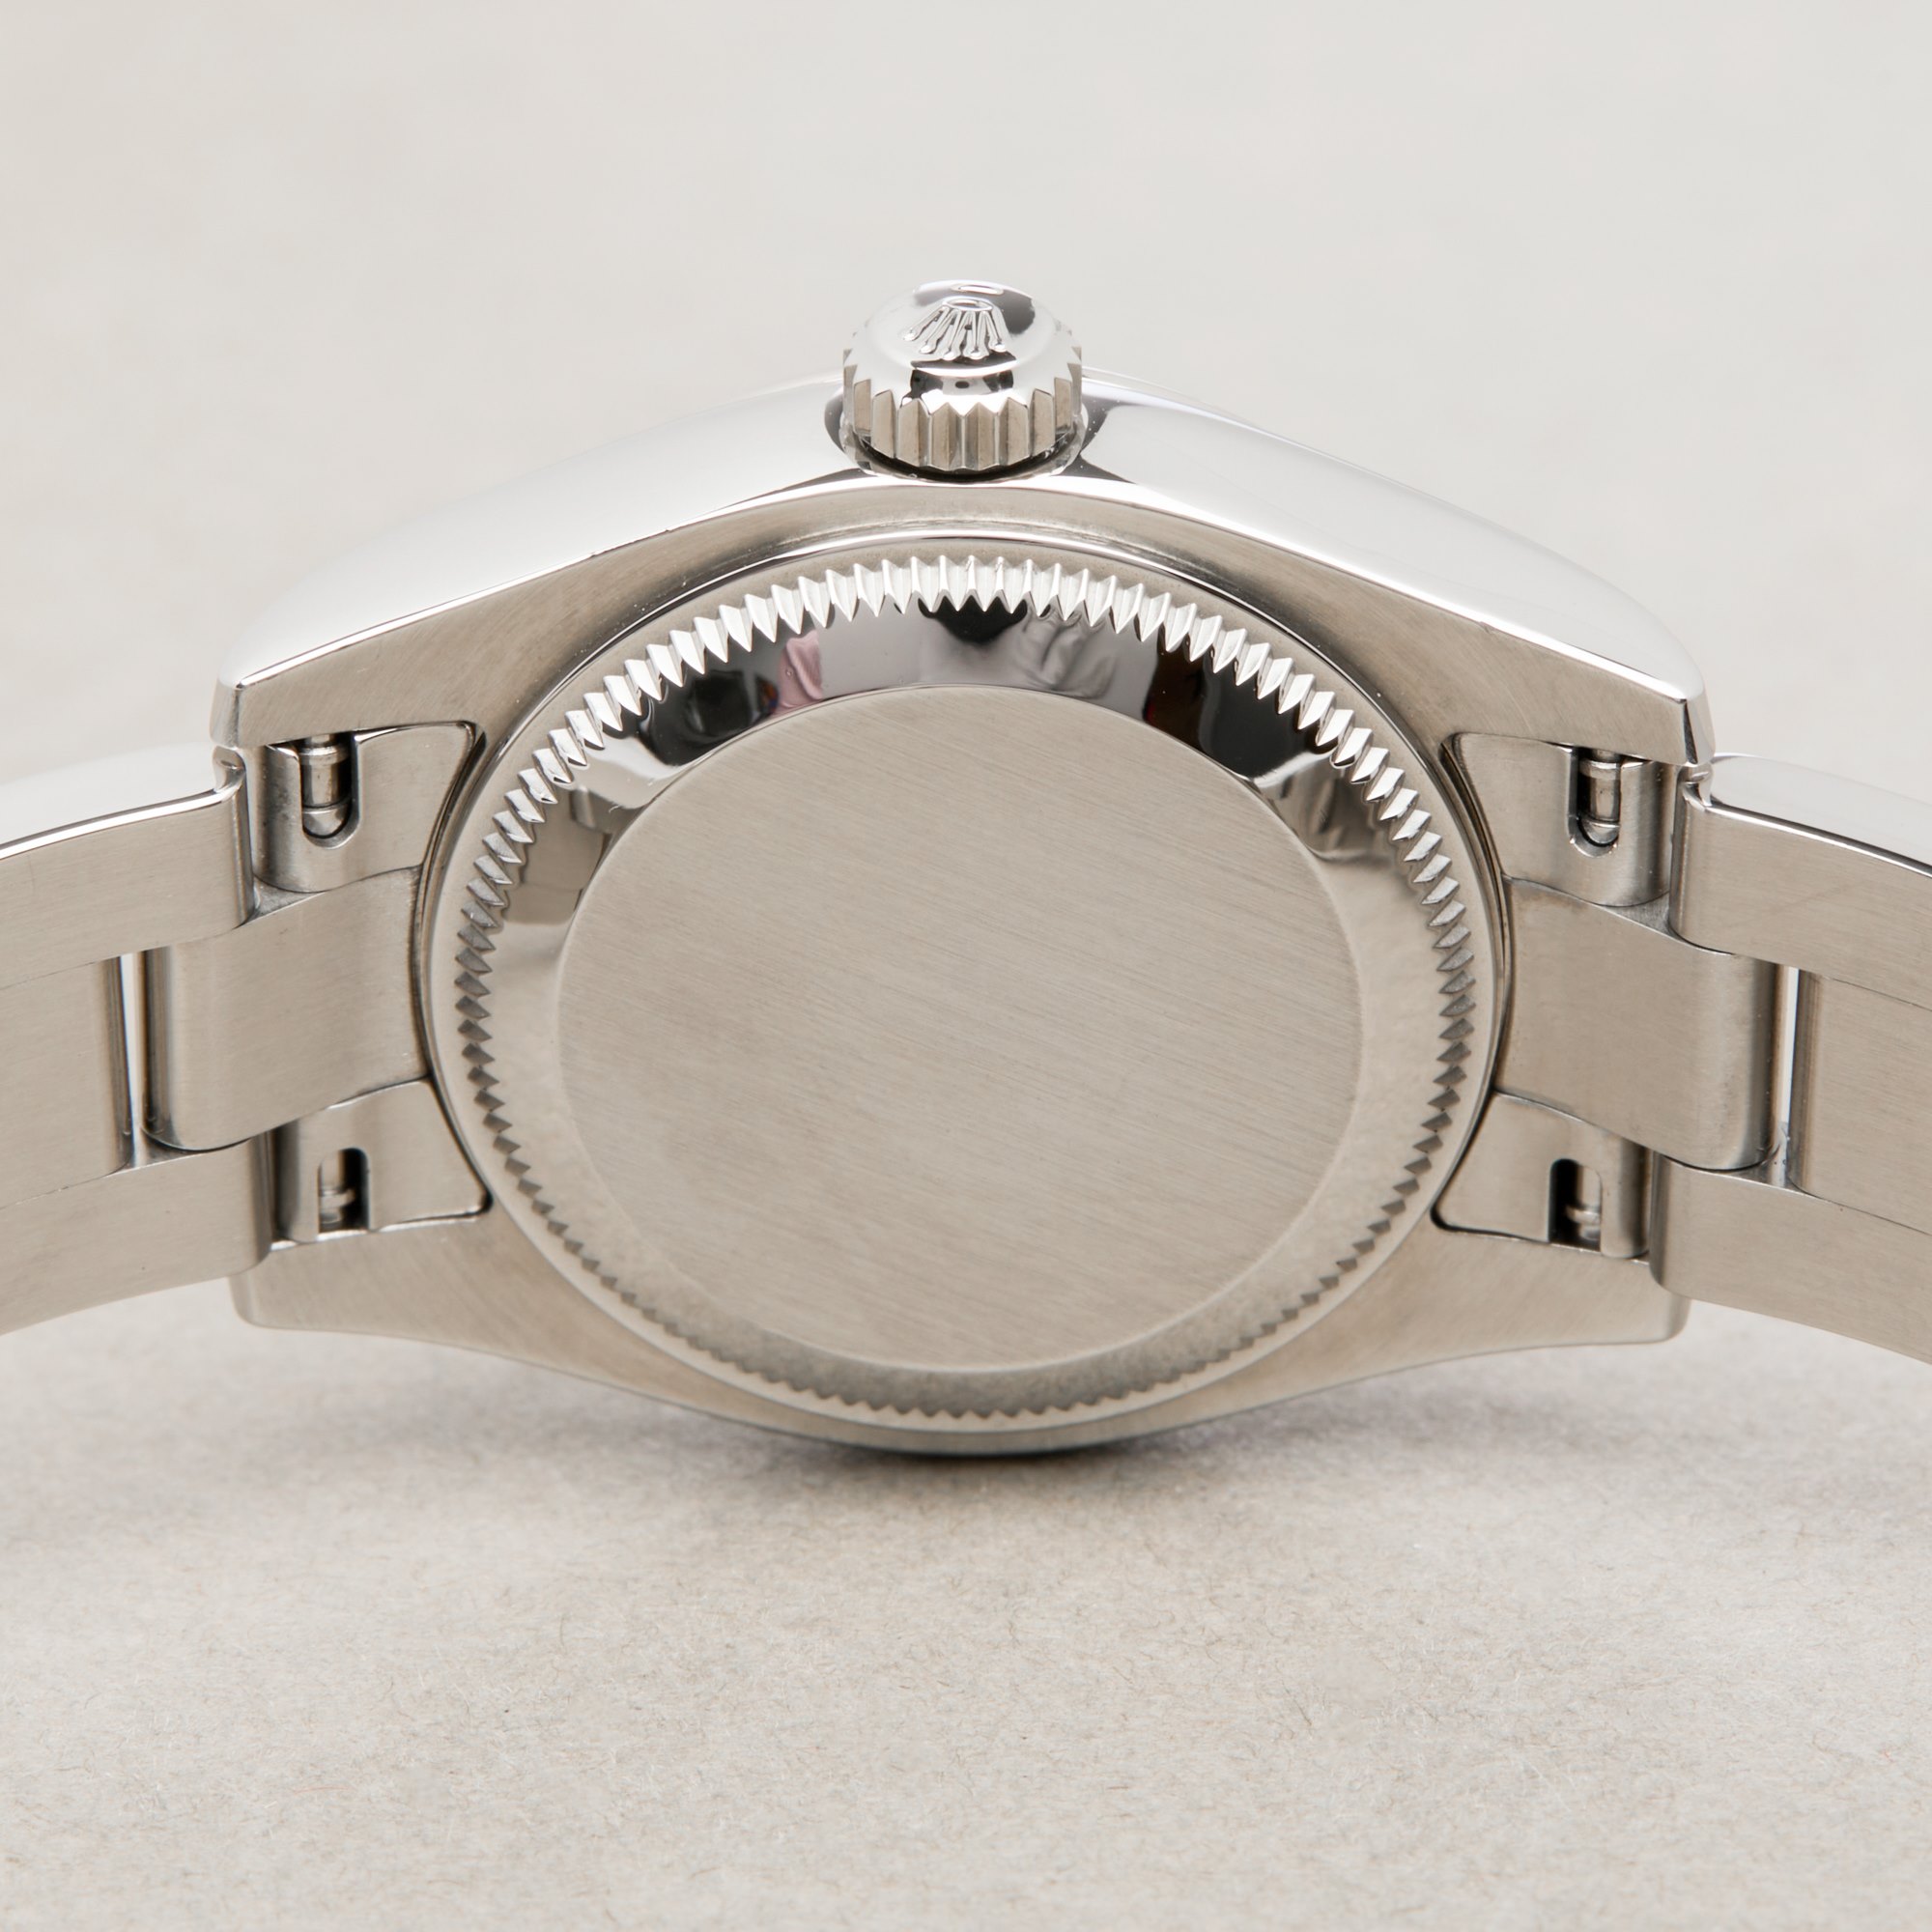 Rolex Oyster Perpetual 26 White Gold & Stainless Steel 179174